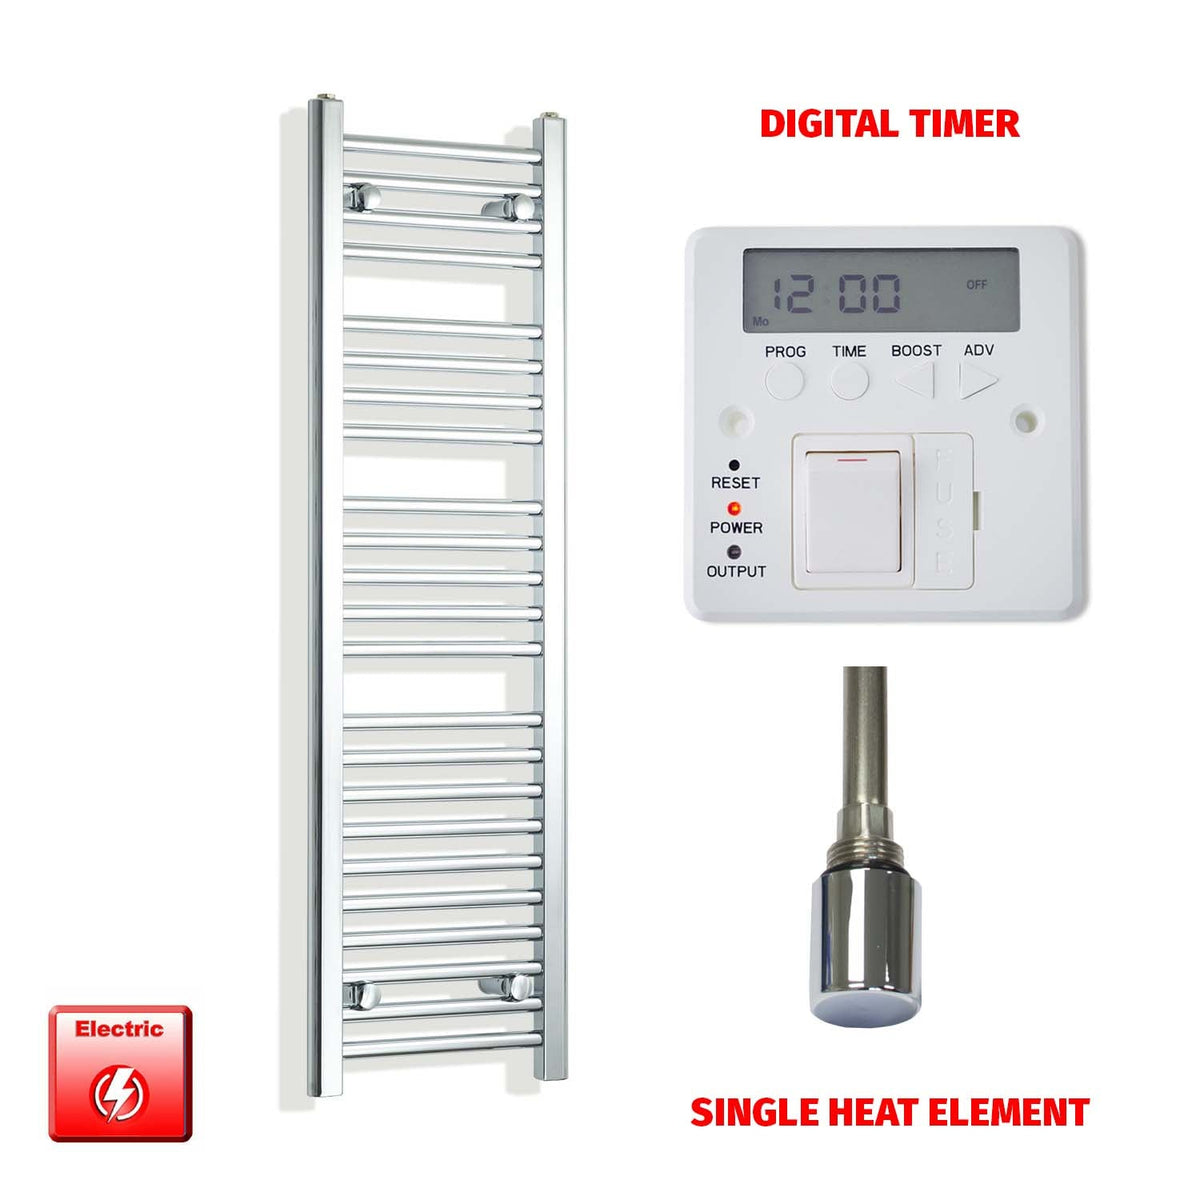 1200mm High 300mm Wide Pre-Filled Electric Heated Towel Rail Radiator Straight Chrome Single Element Digital Timer